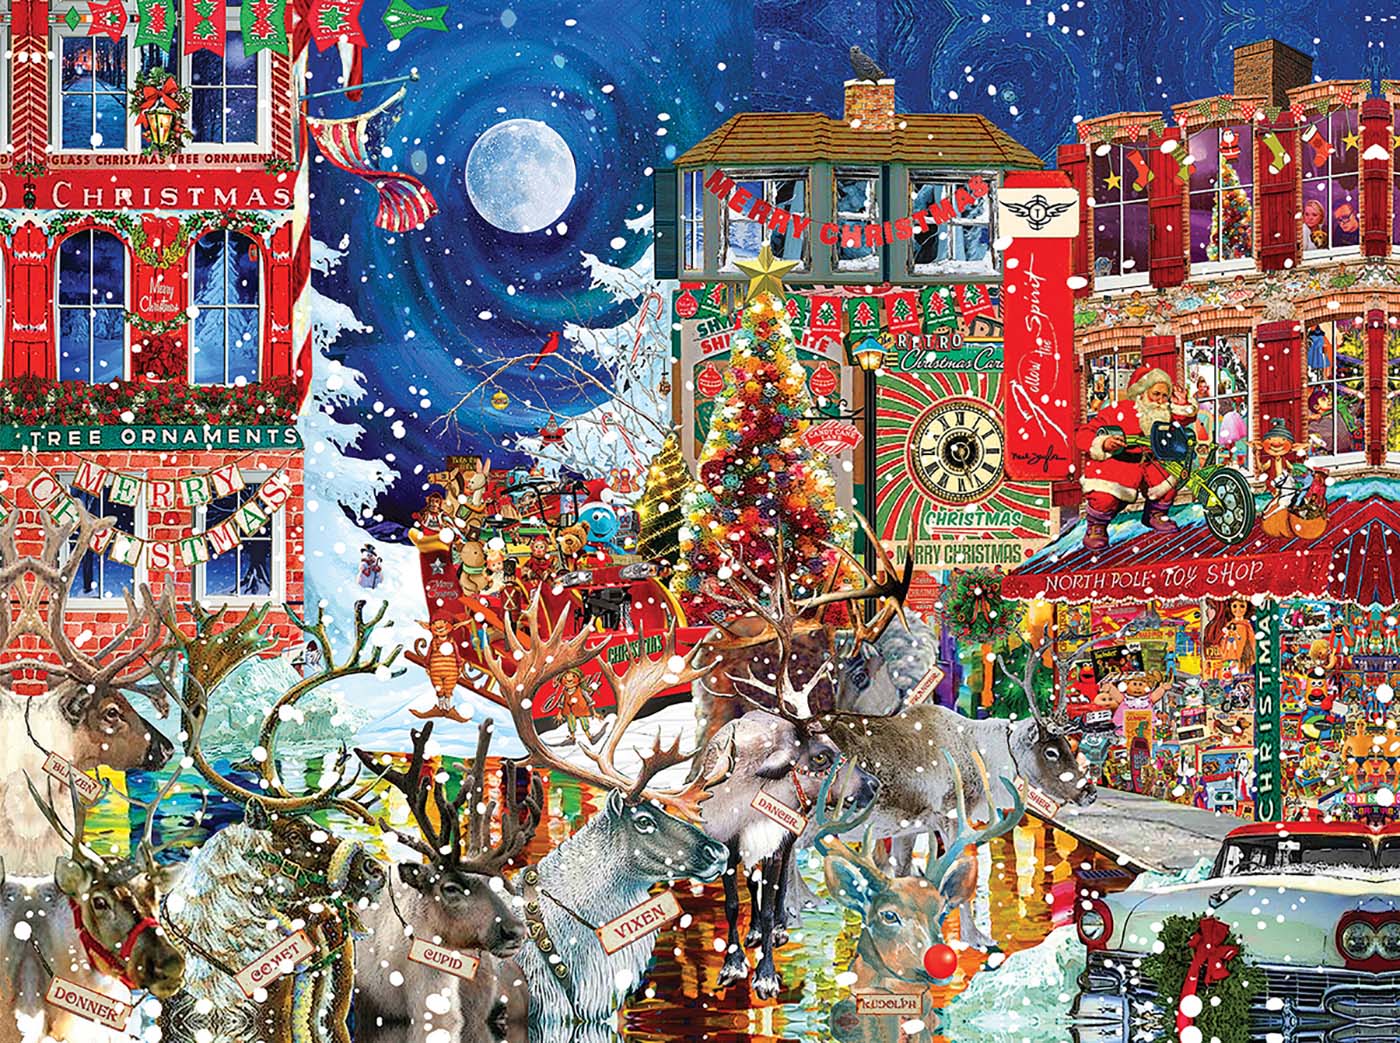 Christmas Collage 1000 Piece Puzzle Old Fashioned Santa Cards